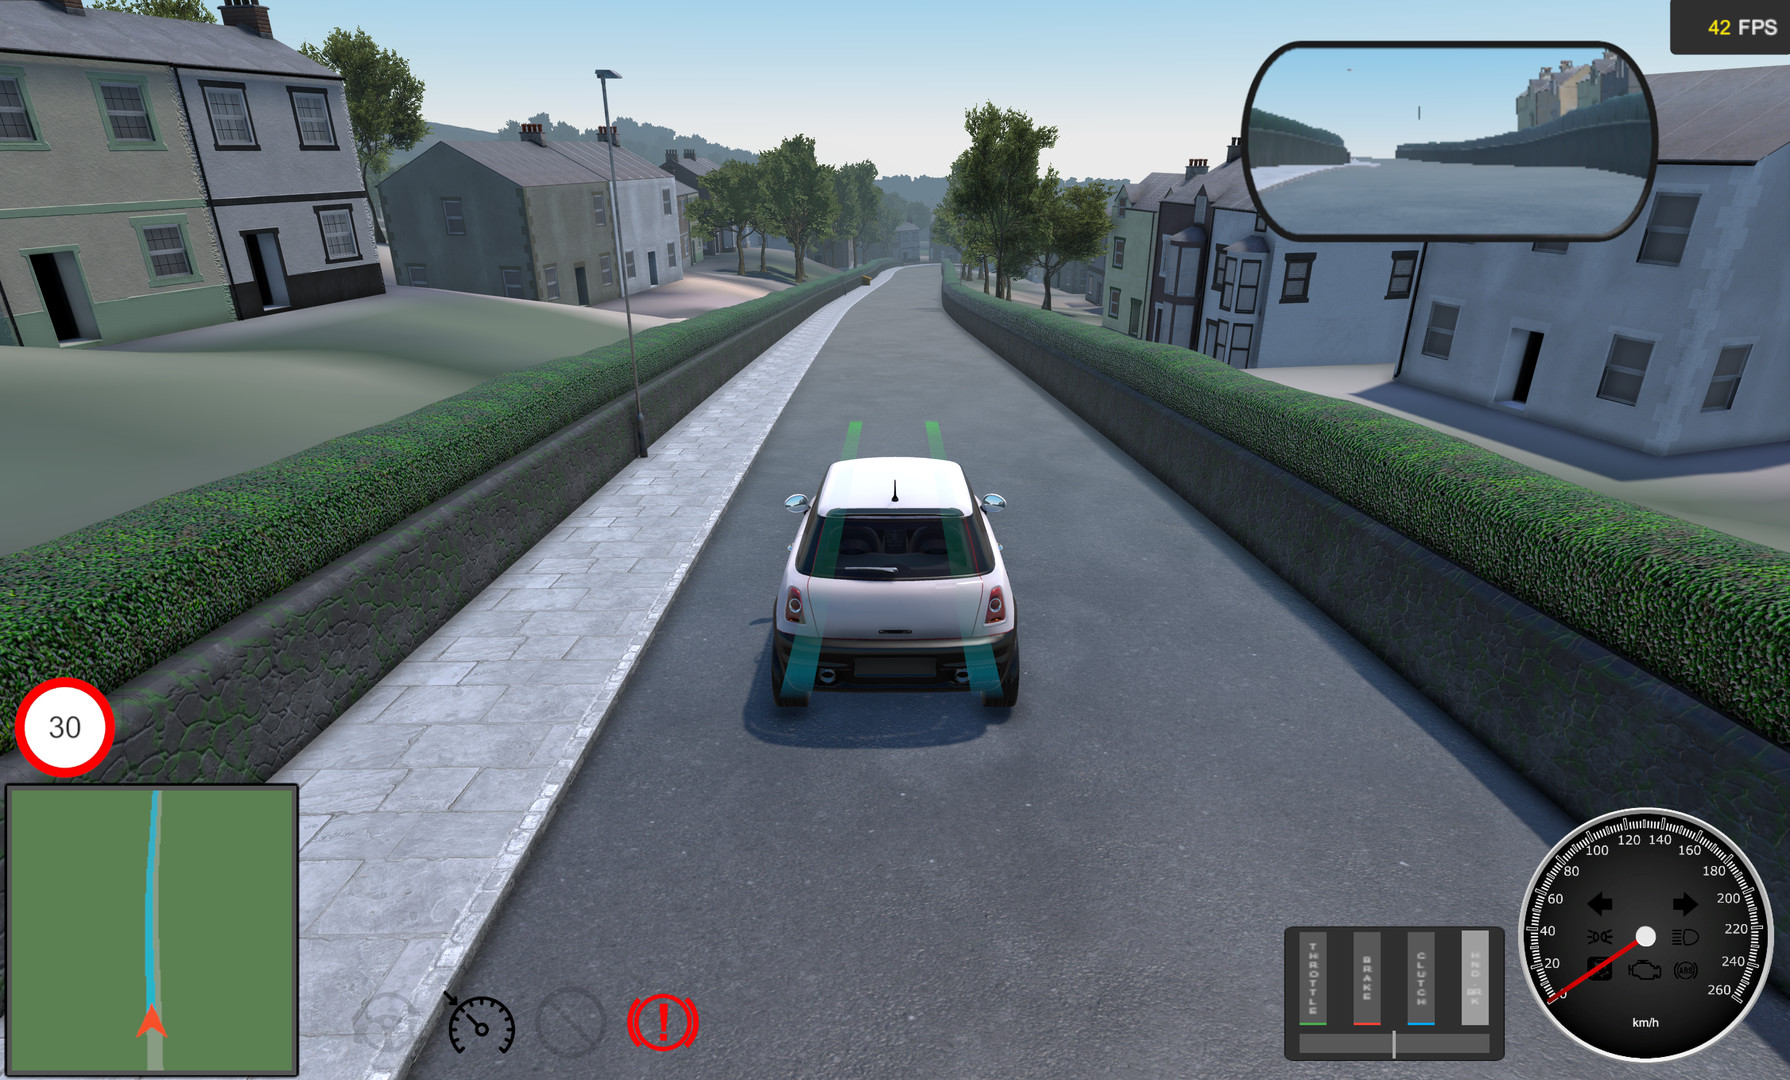 Play Driving Academy Car Simulator Online for Free on PC & Mobile